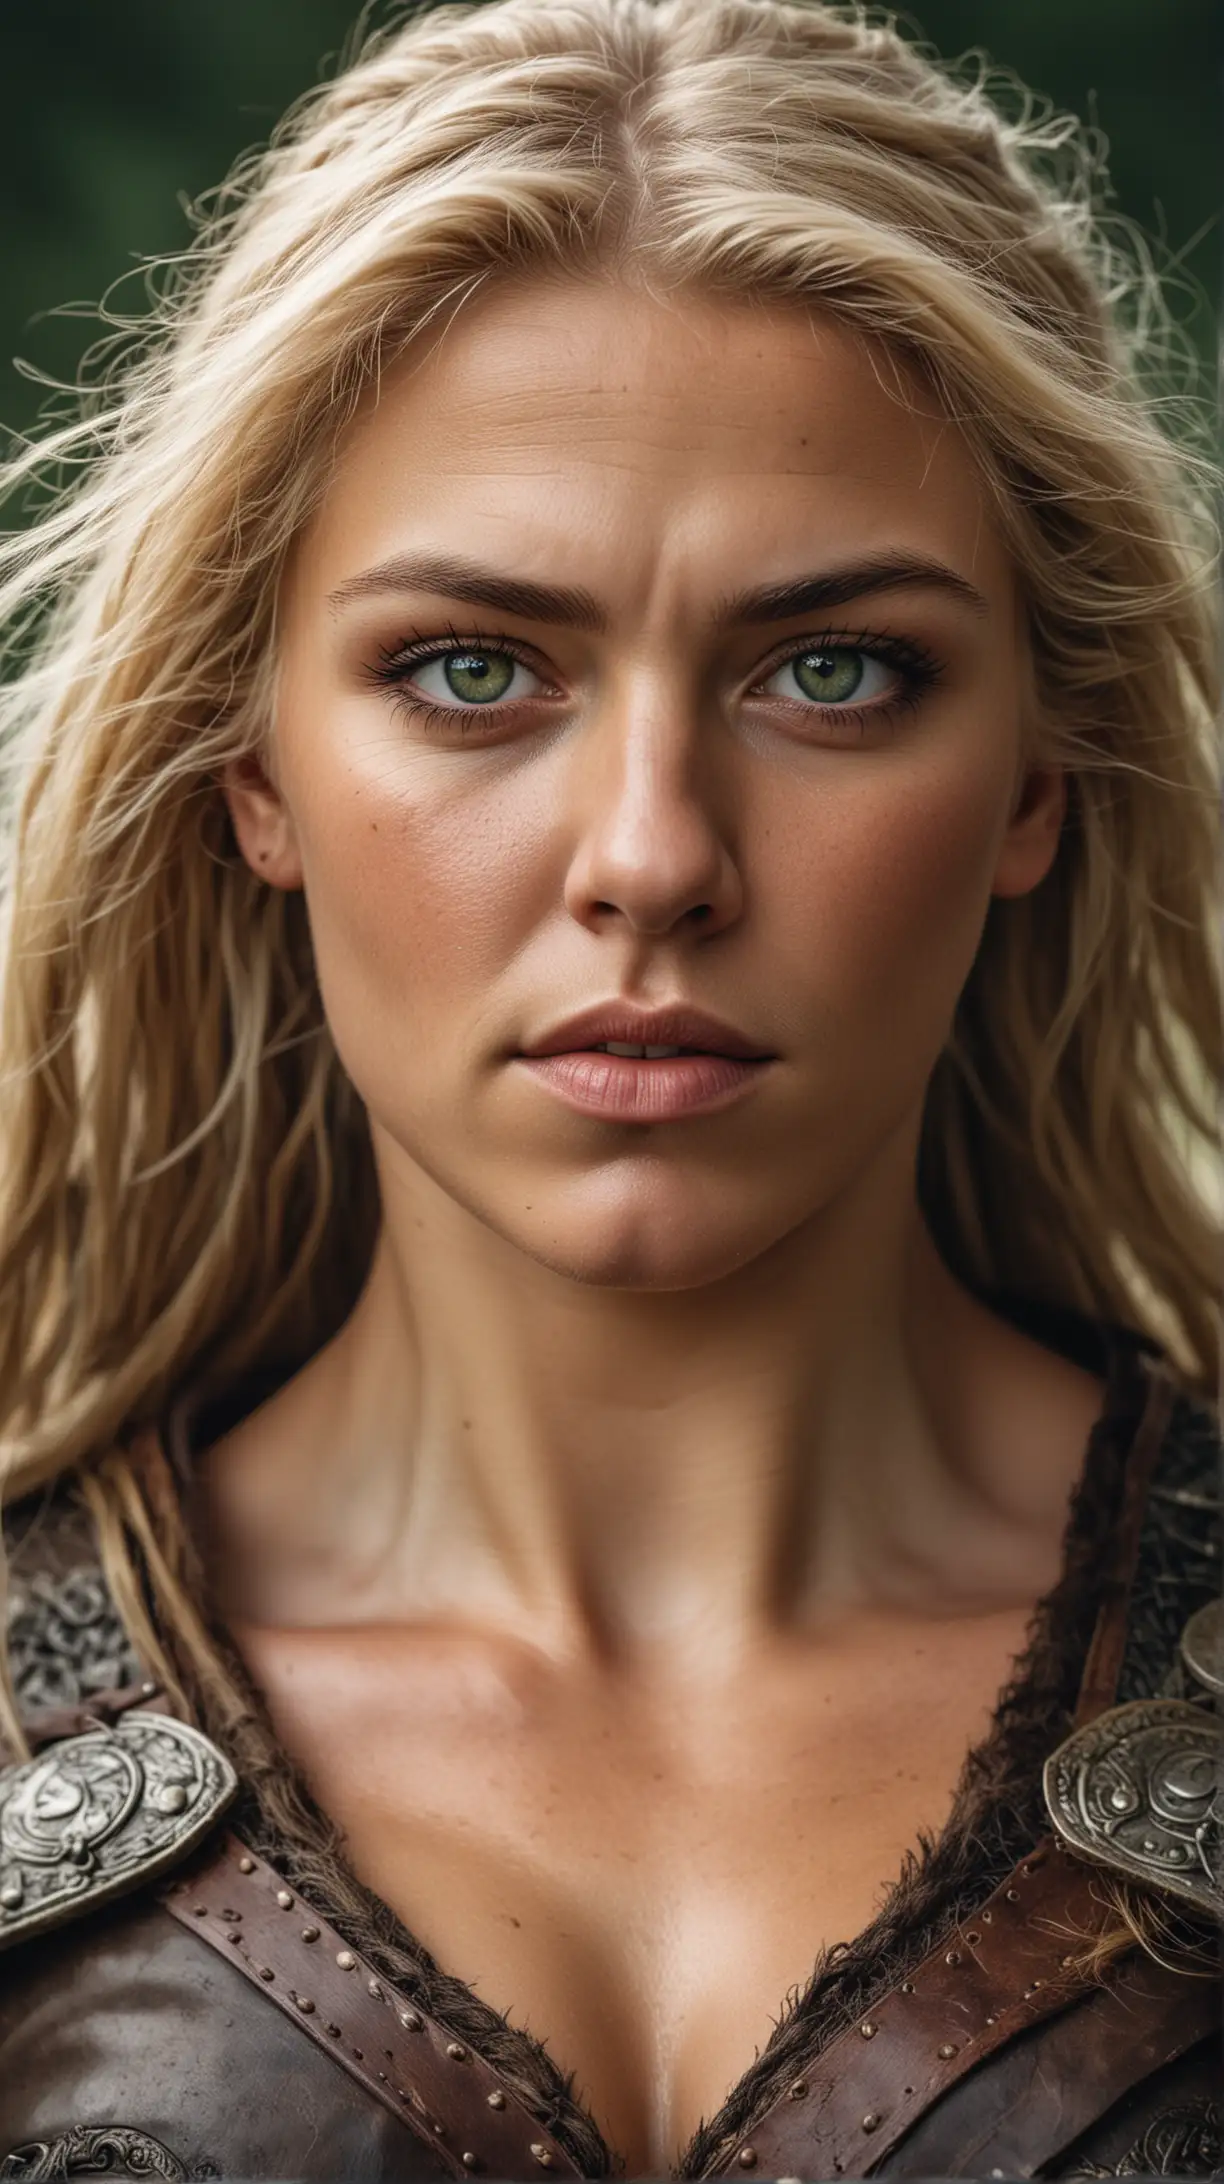 Blonde Viking Woman with Powerful Physique and Green Eyes